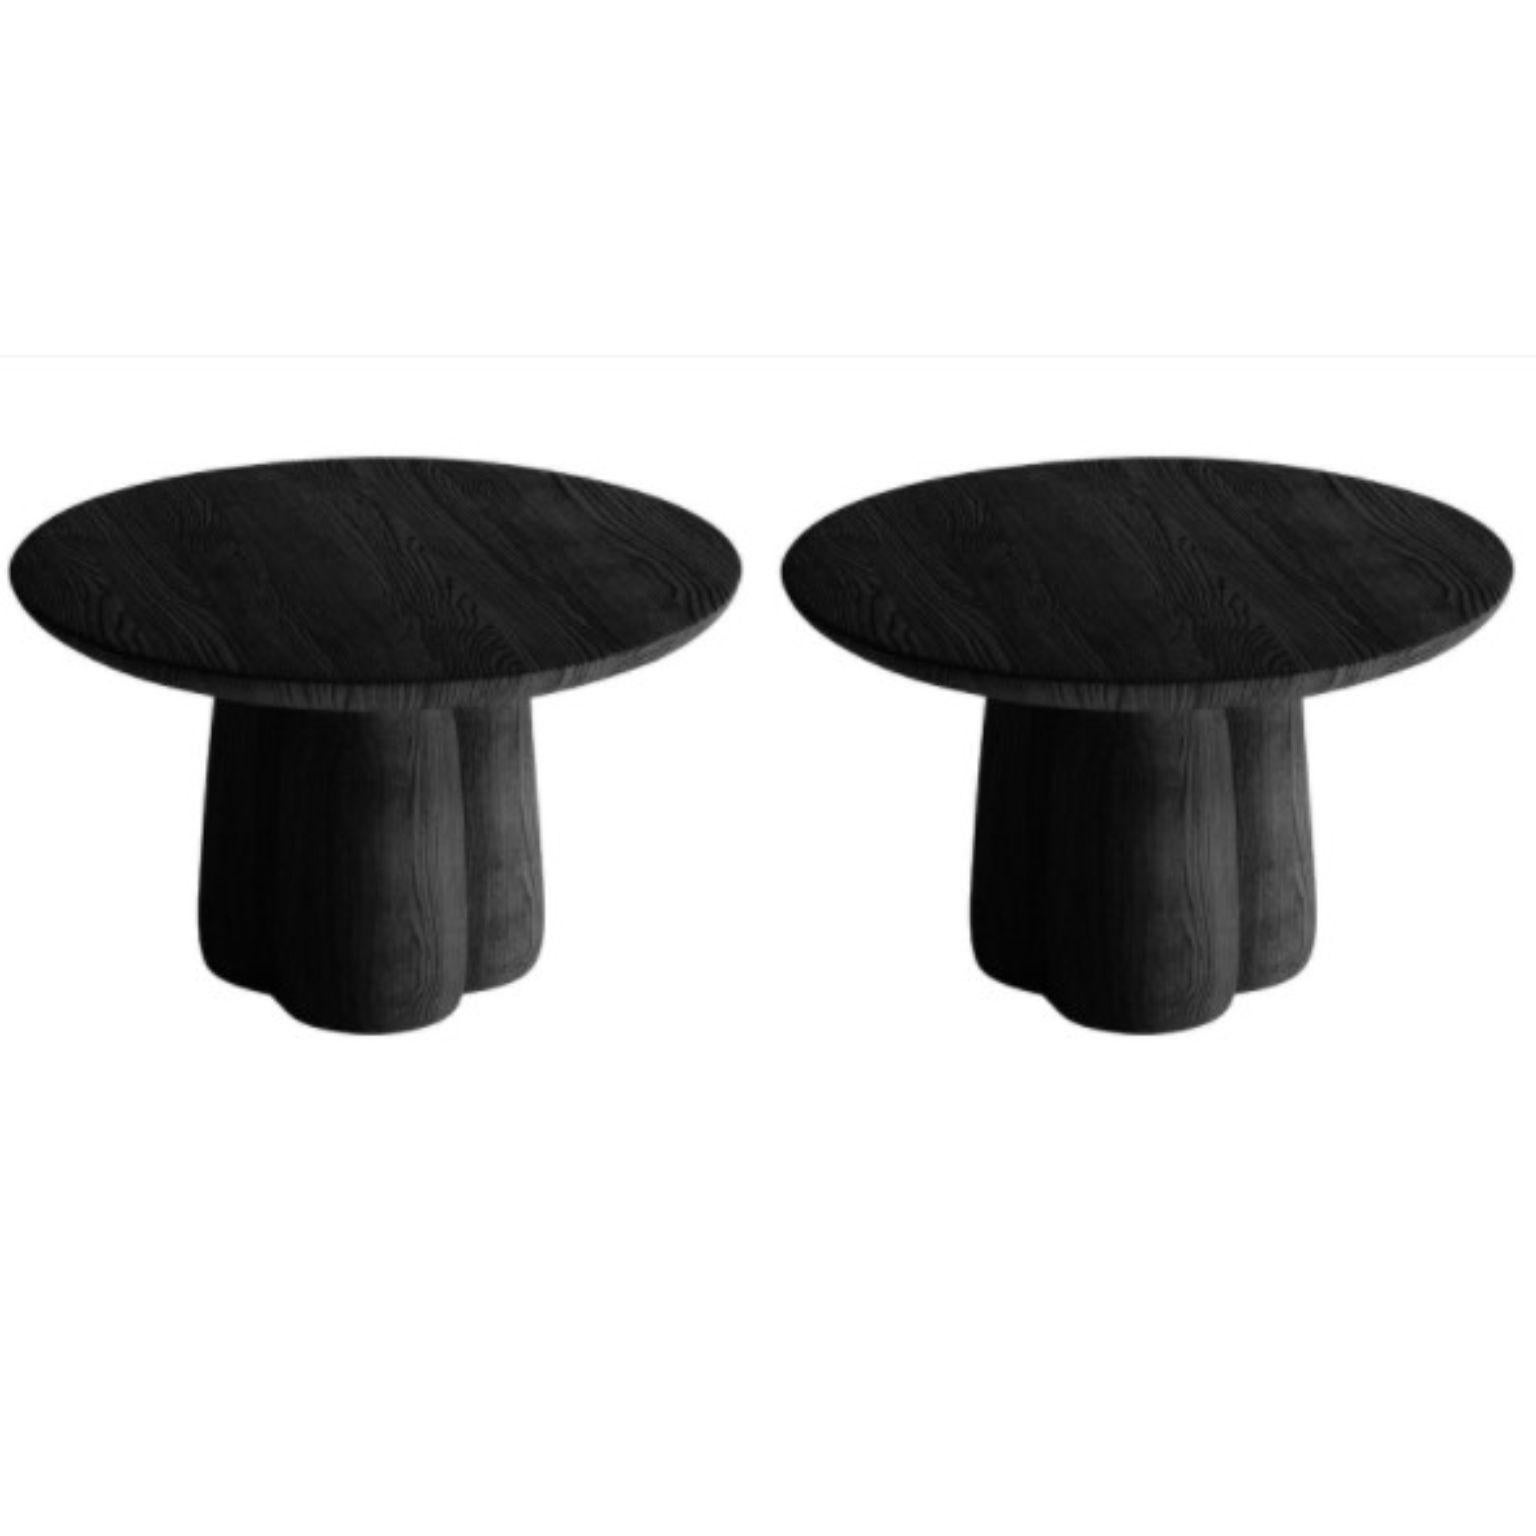 Set of 2 low coffee tables by Faina
Design: Victoriya Yakusha
Materials: Ash in natural or black color
Dimensions: D 58 x H 35 cm

Like strong sunflower stems, SONIAH tables are fed with energy from the ground, saturating with it the space